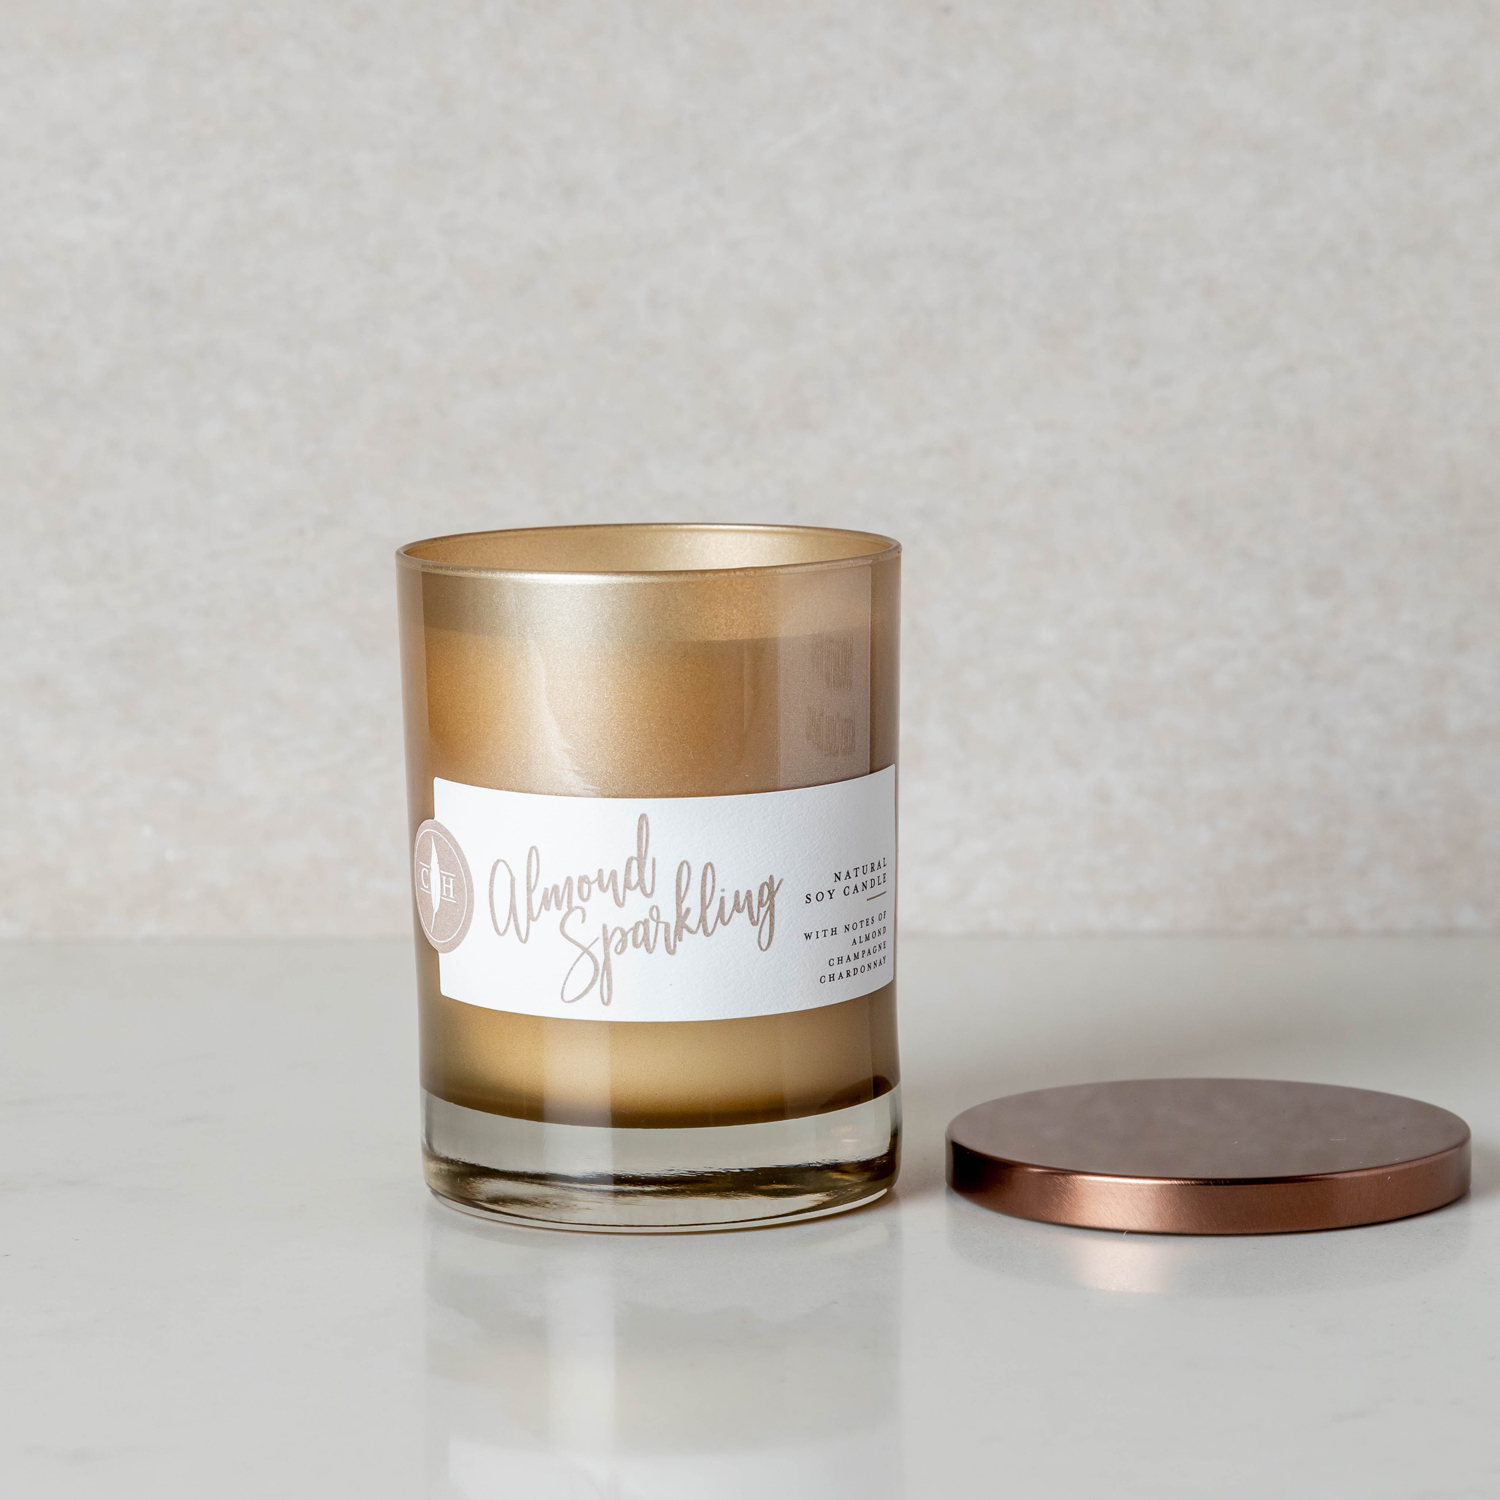 Cooper's Hawk Candle - Almond Sparkling